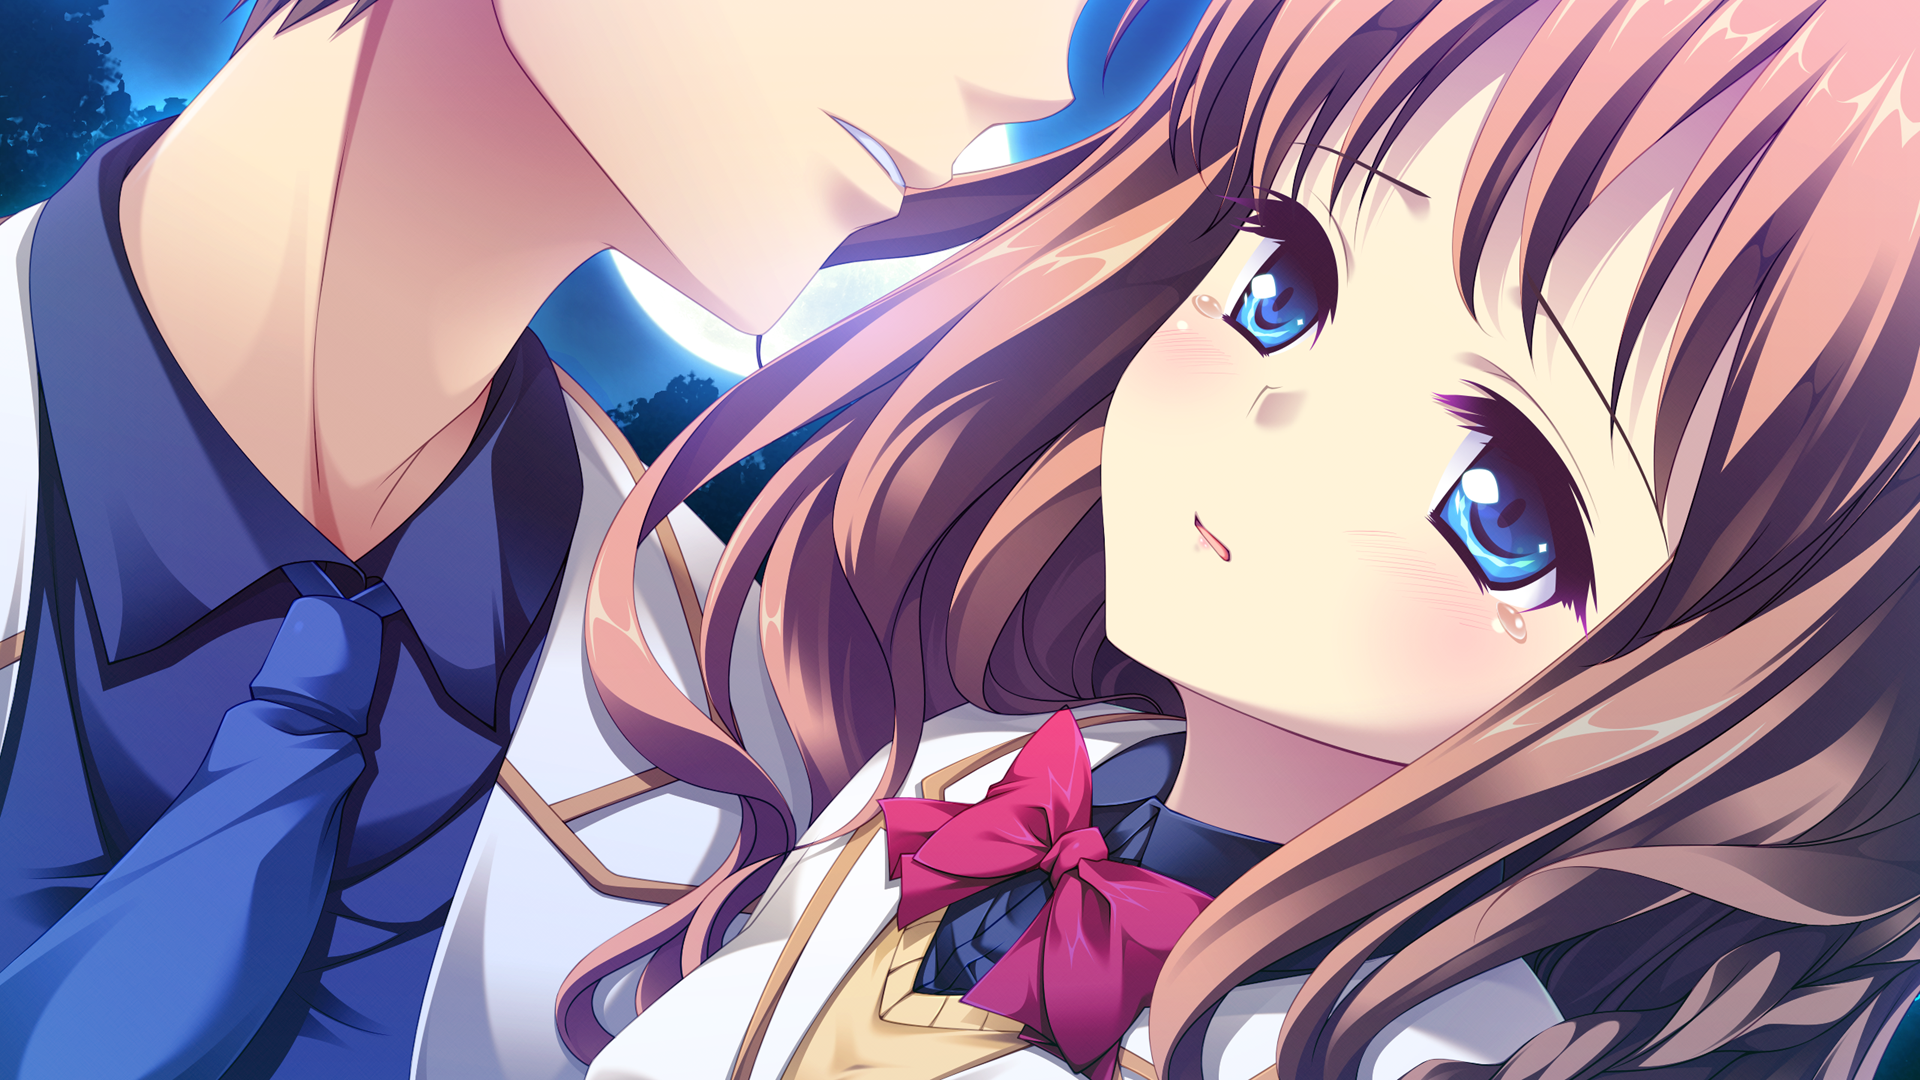 Melty moment game cg.